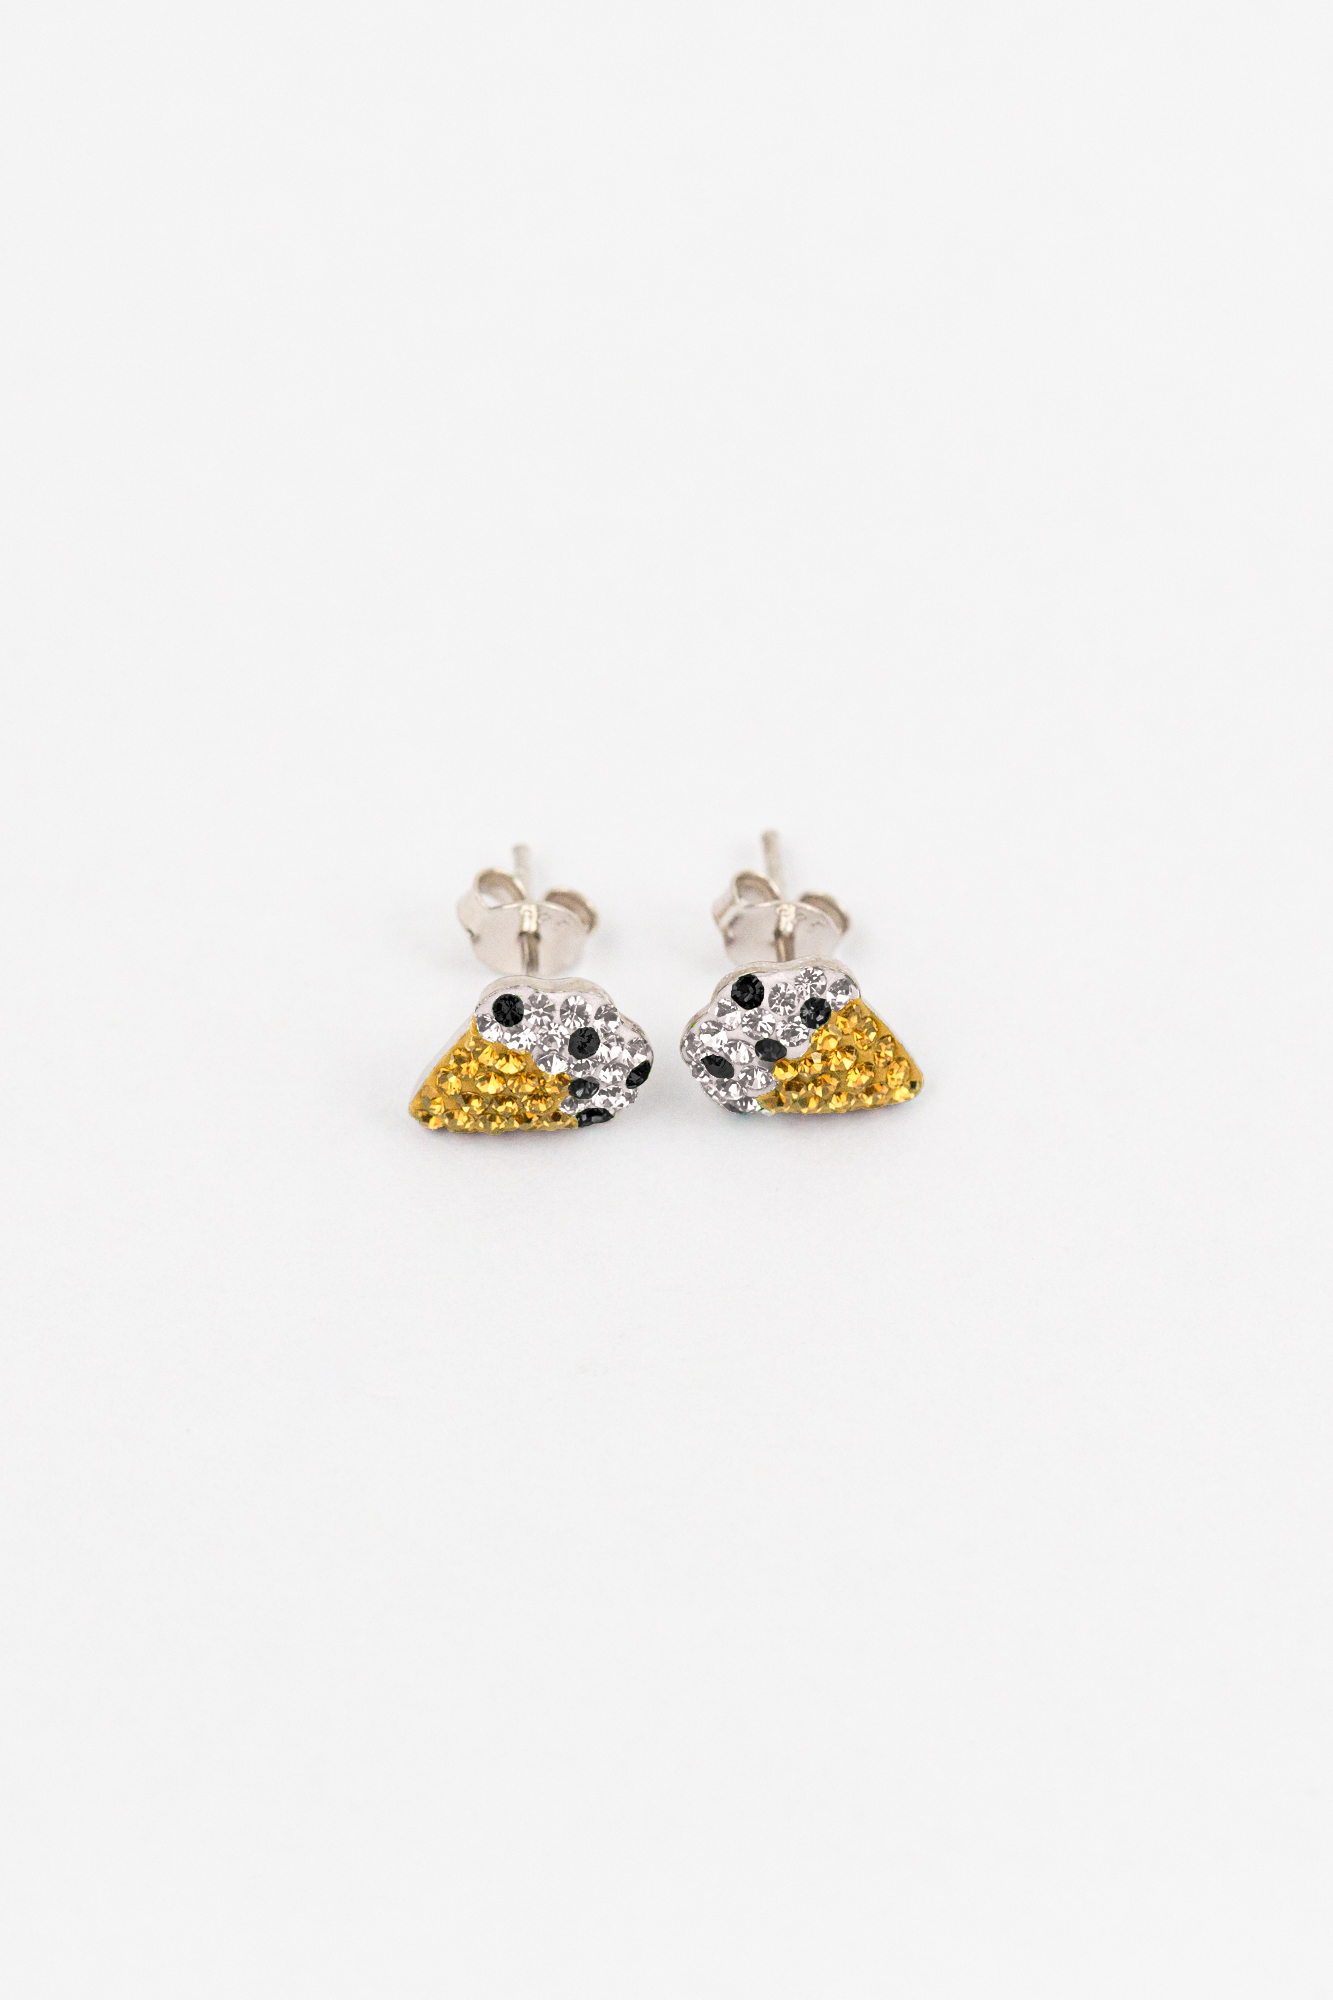 Cookies and Cream Ice Cream Cone Crystal Stud Sterling Silver Earrings | Annie & Sisters